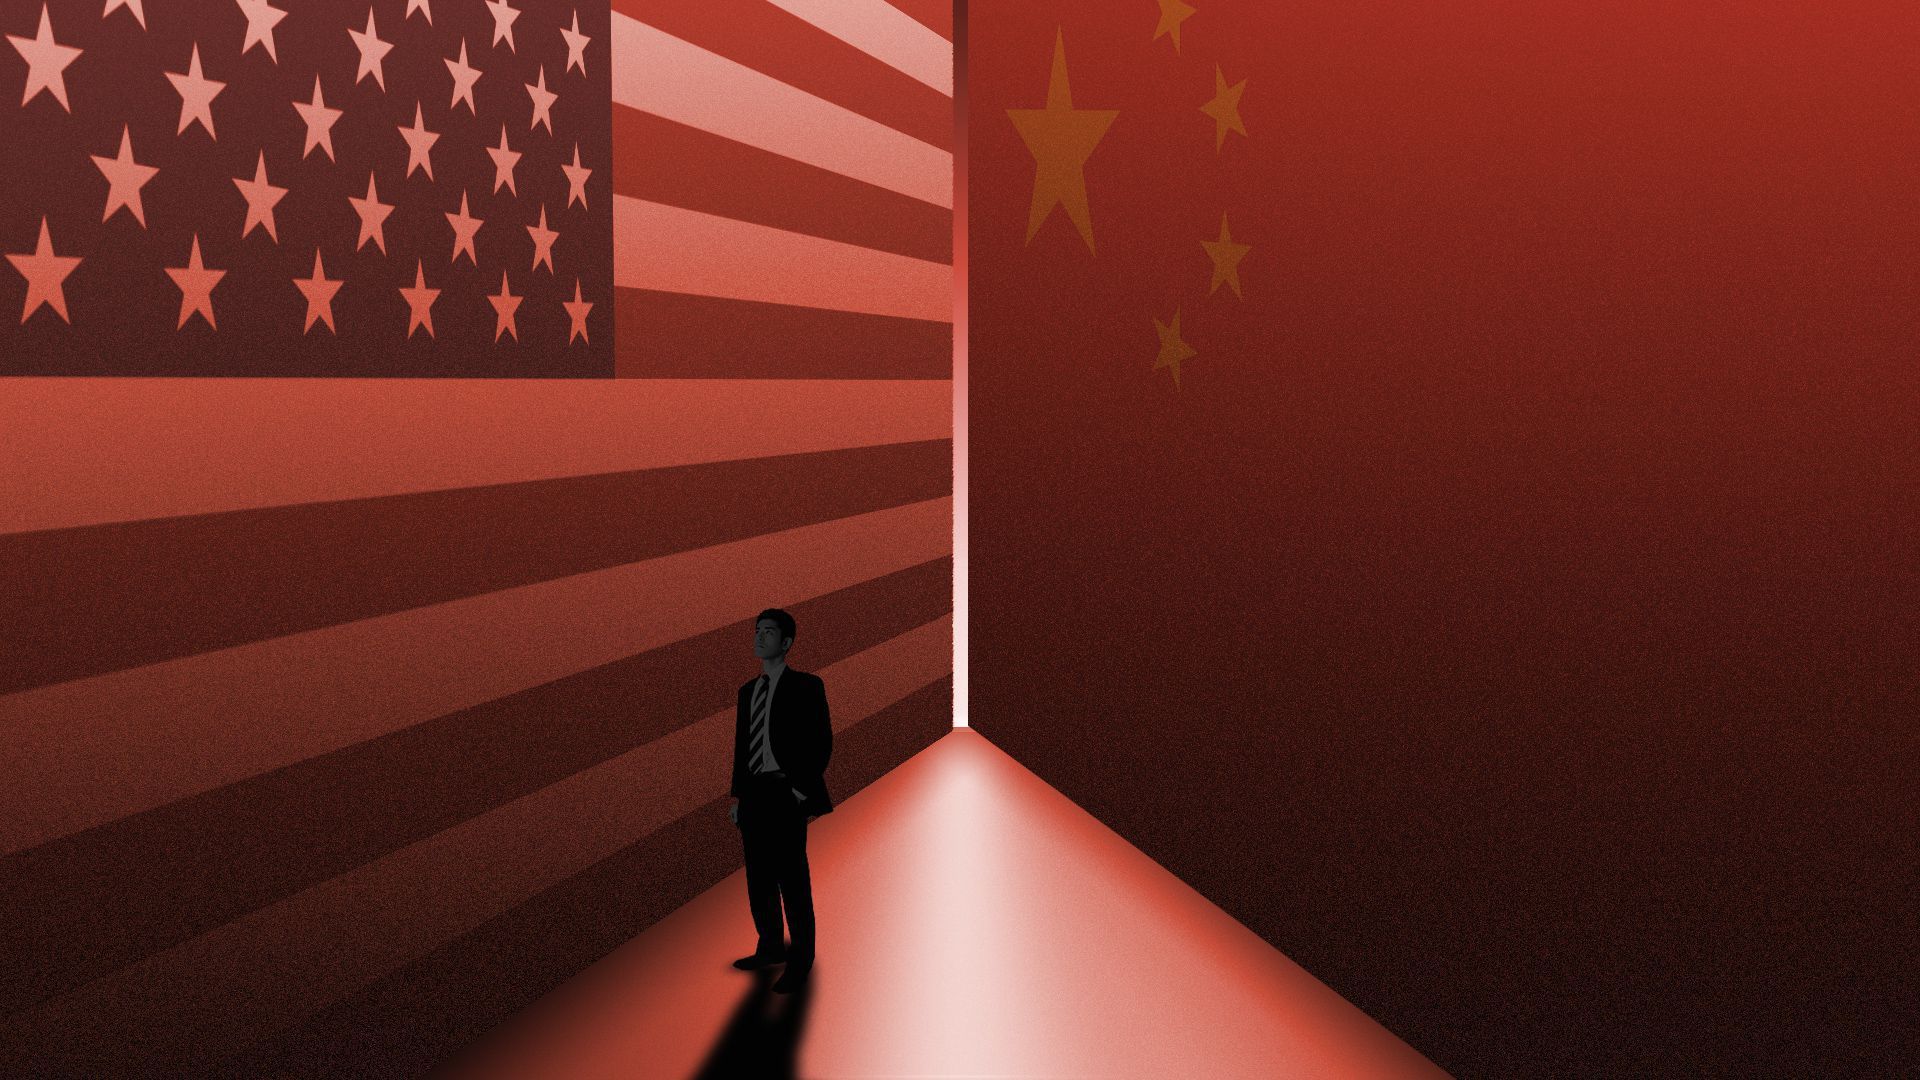 Illustration of a person stuck between the American and Chinese flags.